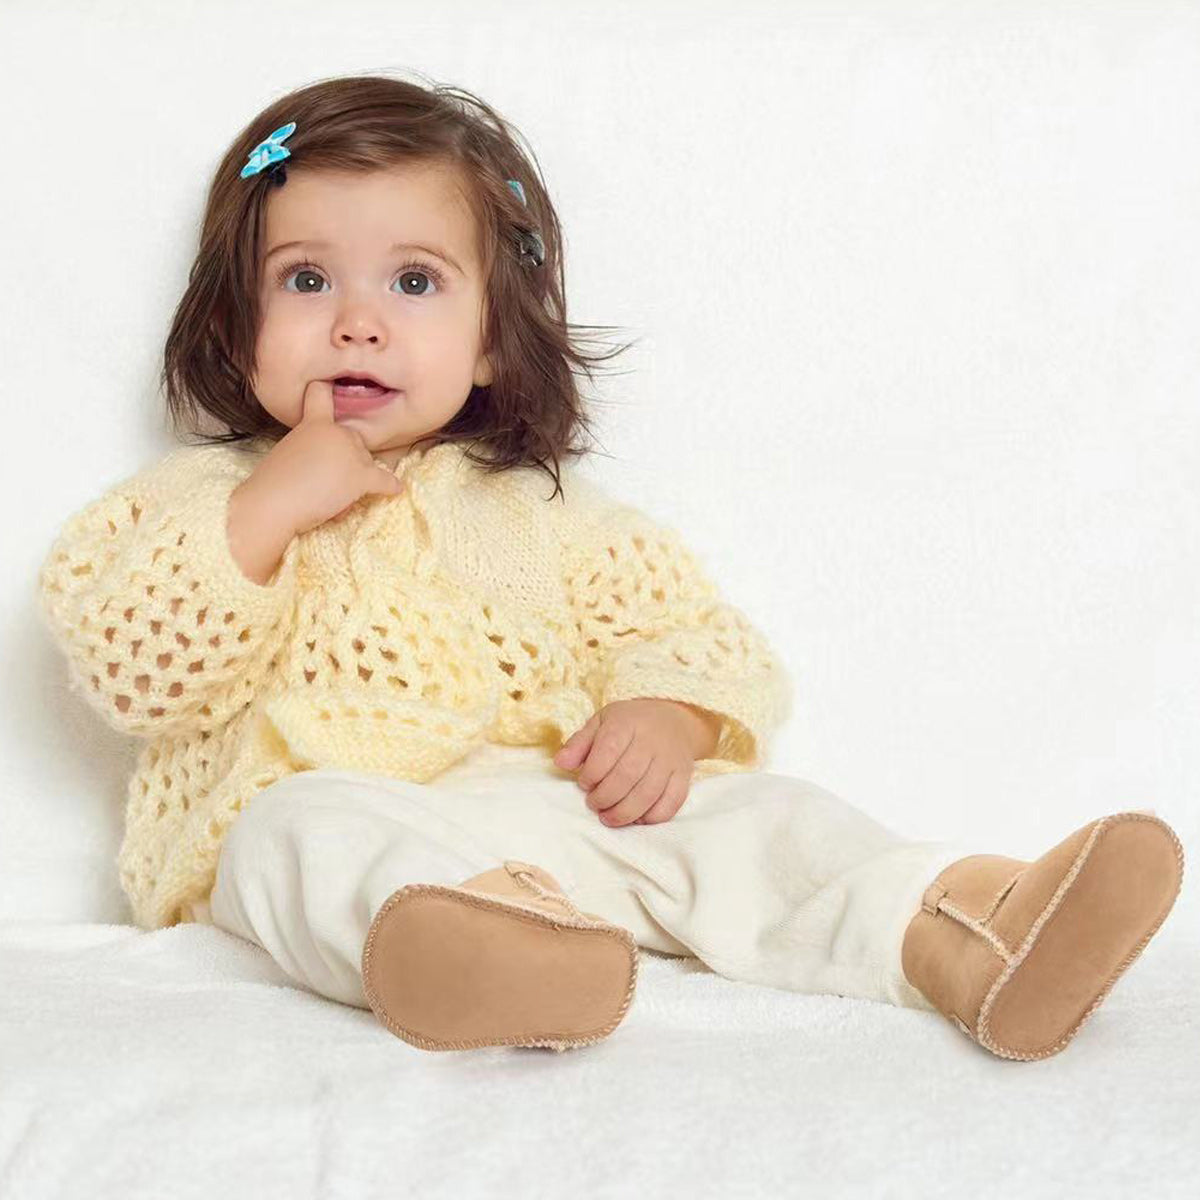 The Best UGGs for Your Newborn